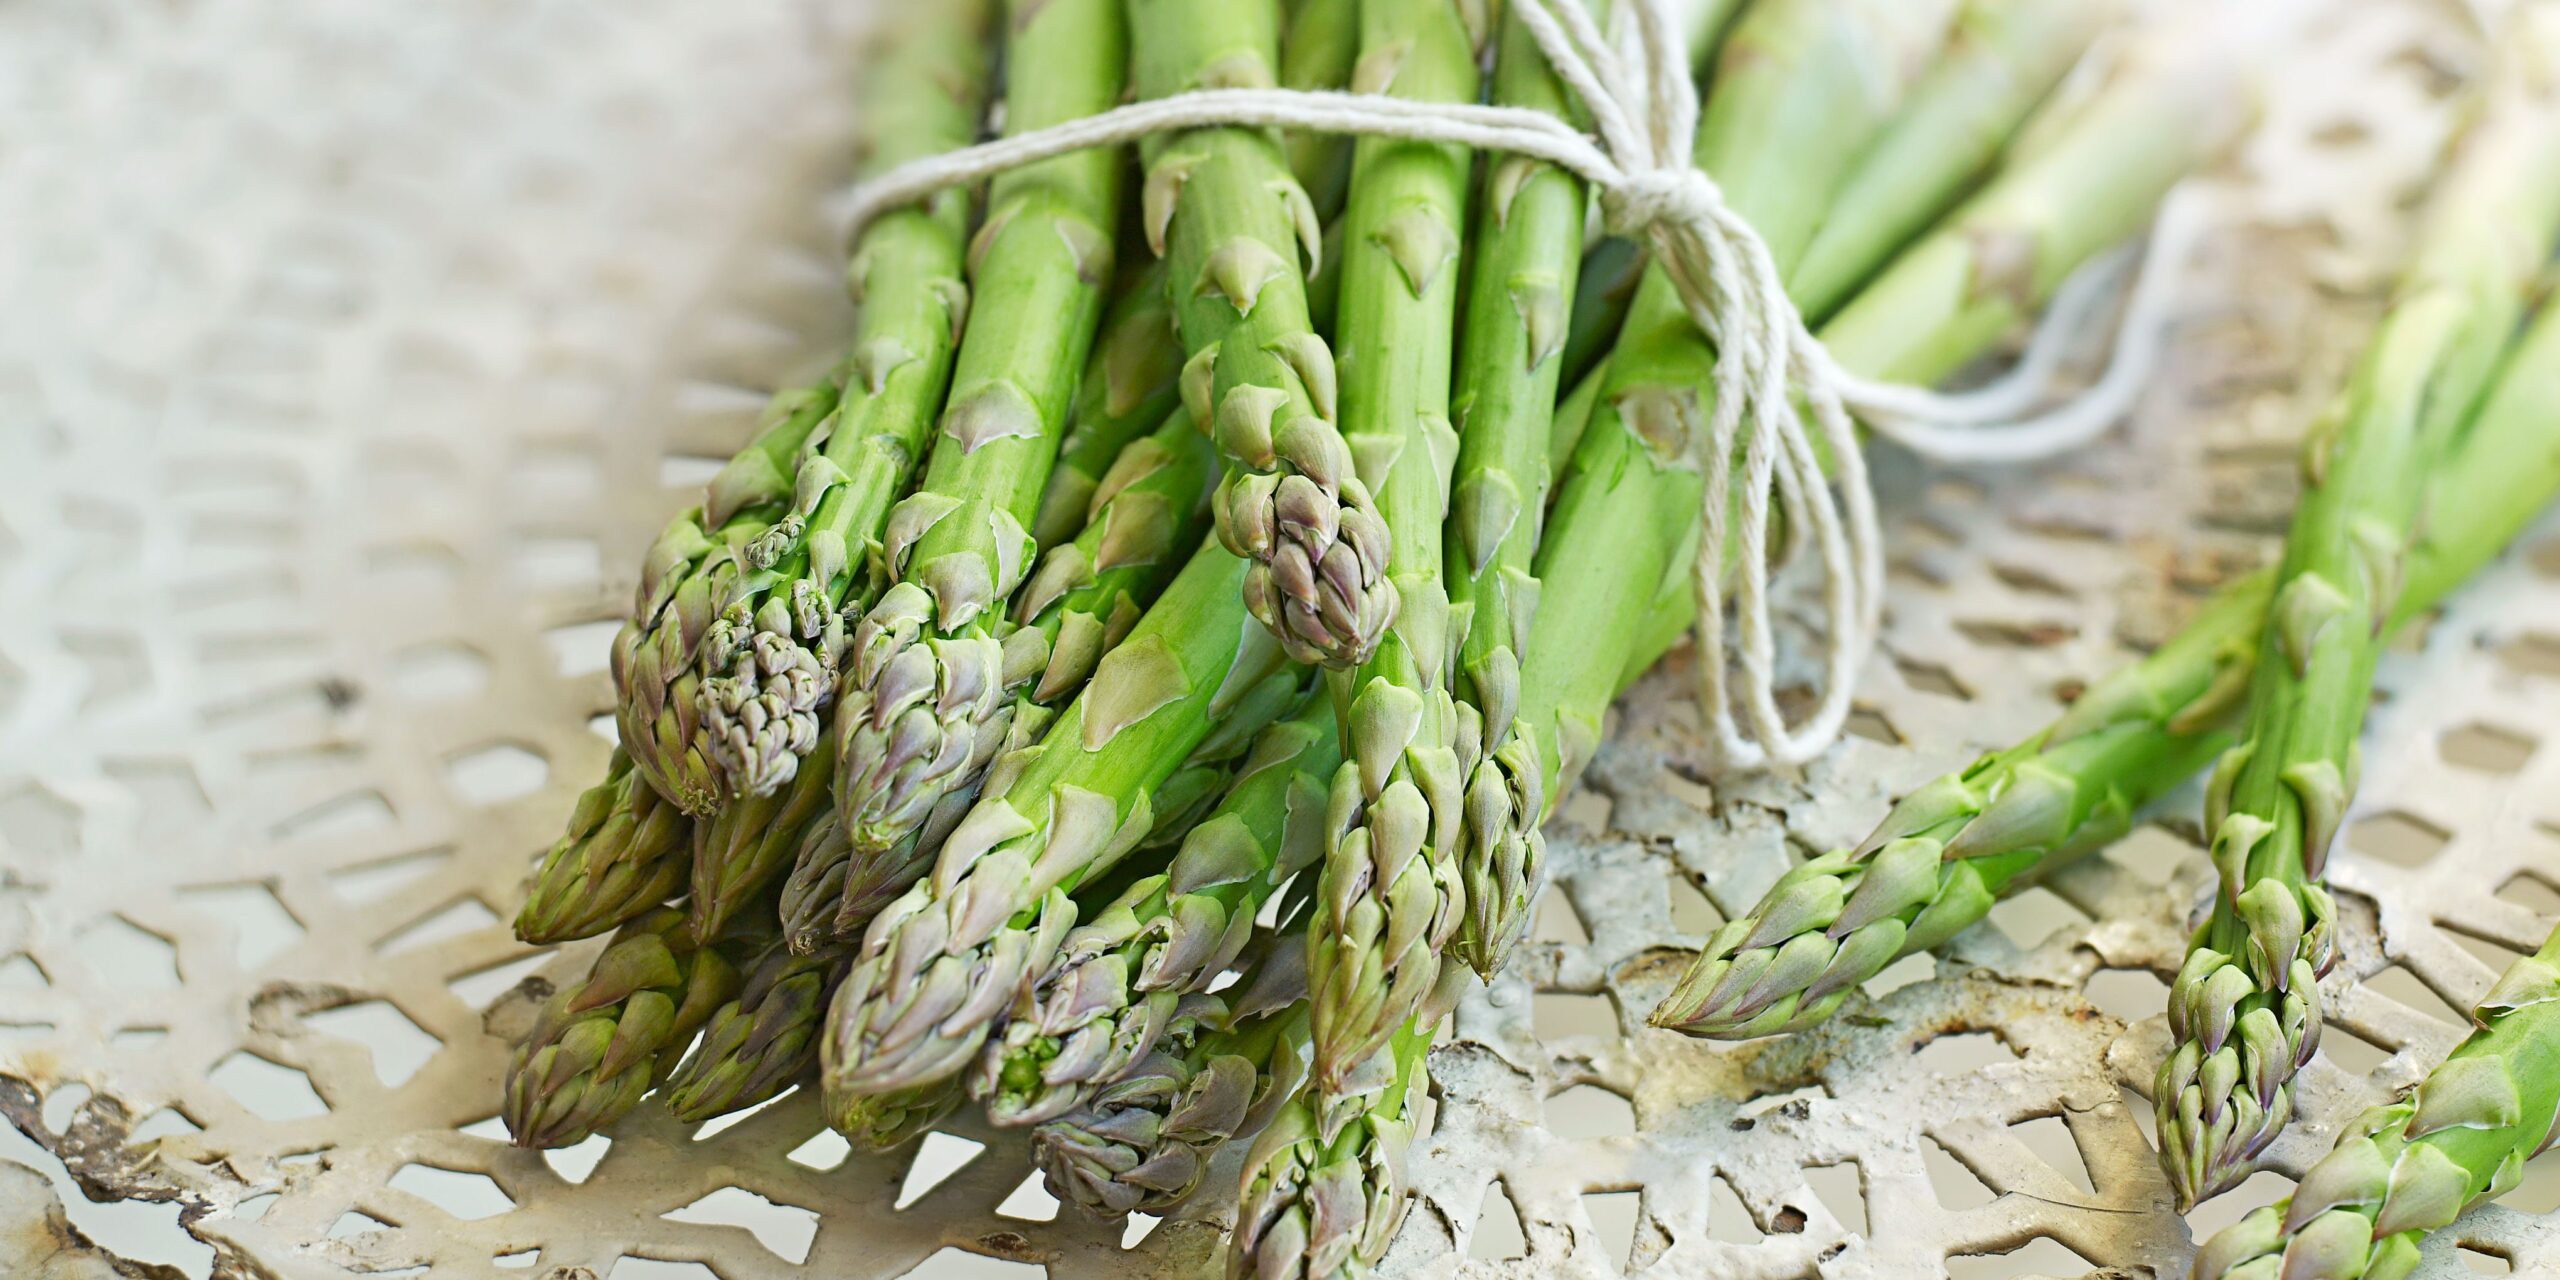 Freezing Asparagus - Freezing, Canning, and Pickling Techniques